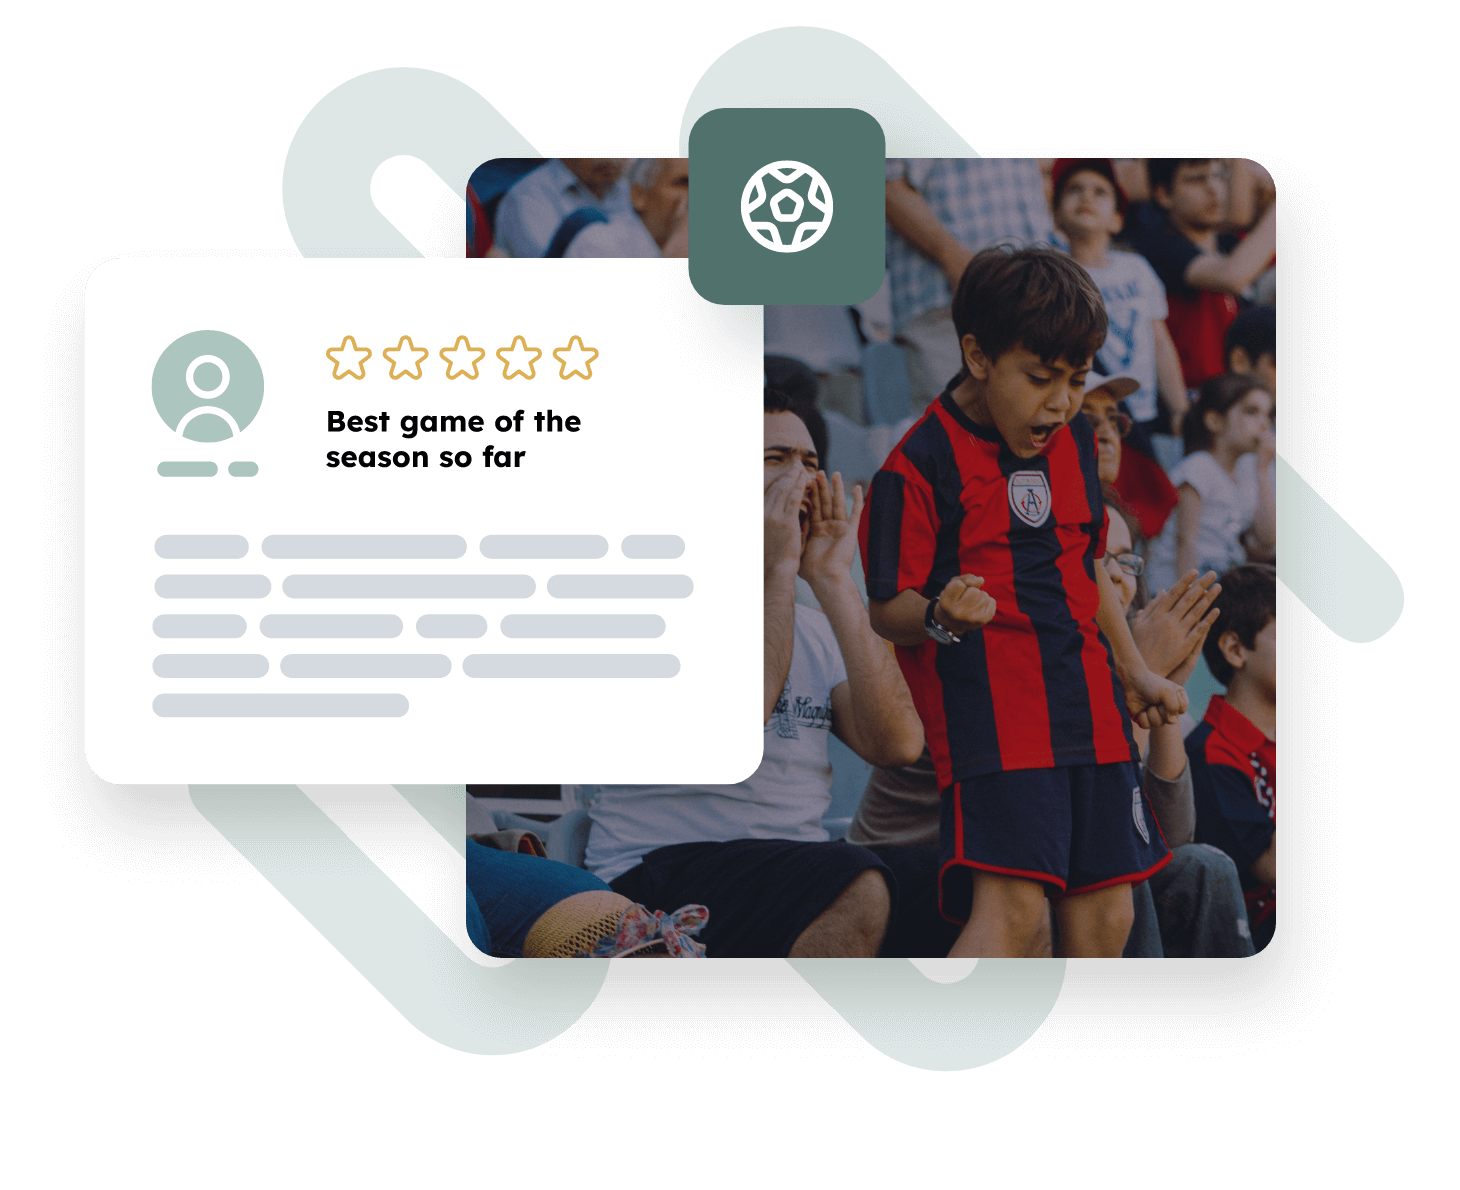 Subscriptions: Boost fan engagement and revenue with TicketCo's season ticket subscriptions. Create flexible subscription plans and deliver exclusive benefits to loyal fans.